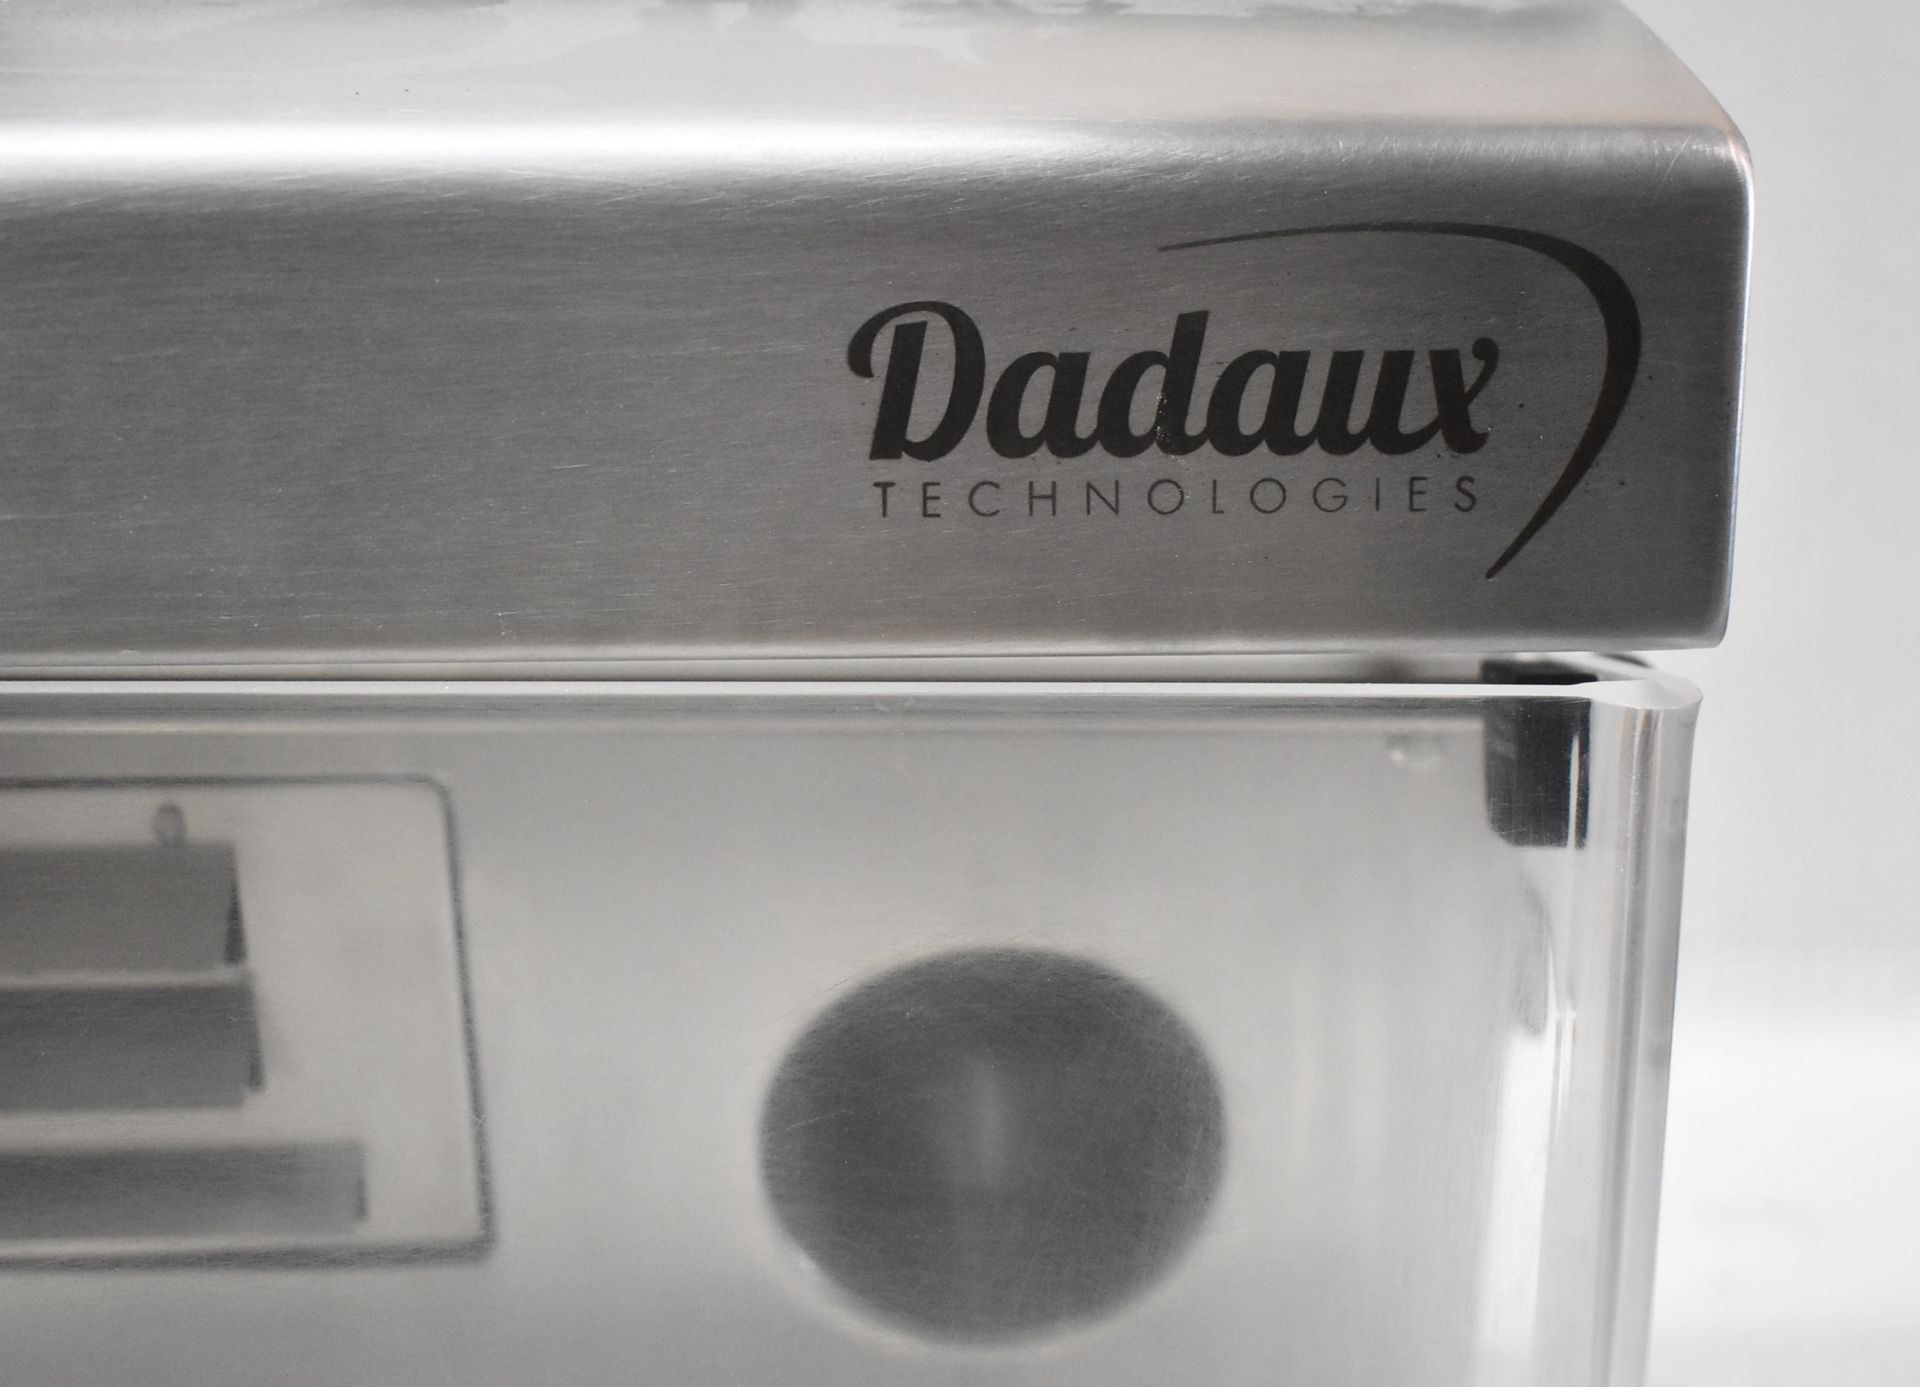 1 x Dadaux Setna Refrigerated Meat Mincer - Image 6 of 17